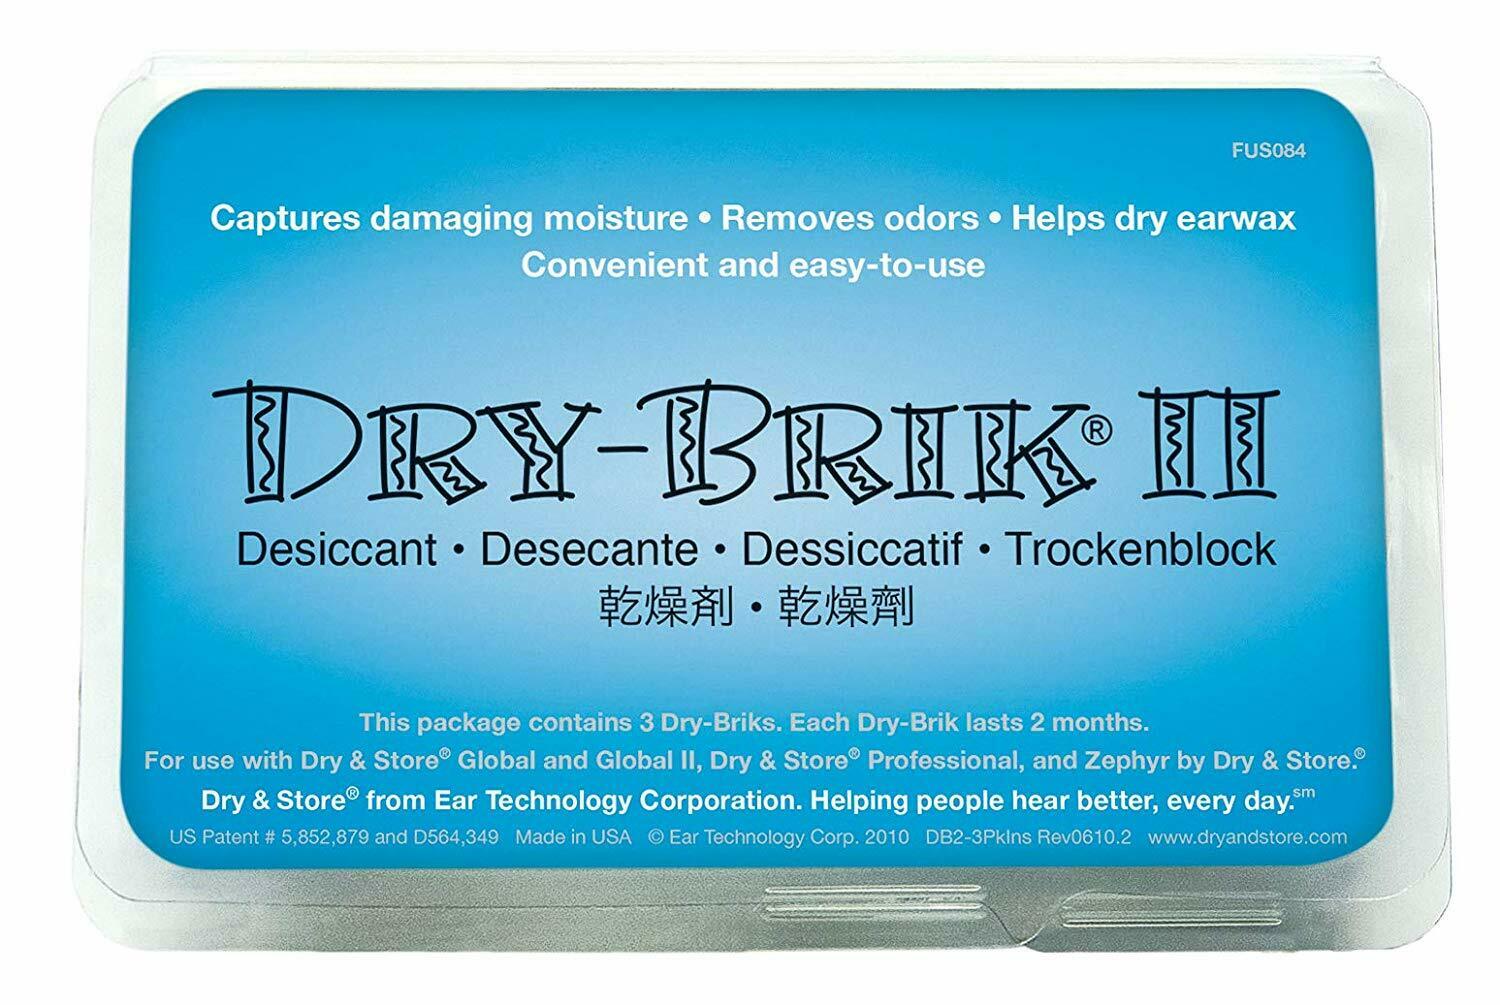 Dry Brik Ii Desiccant Blocks For Dry And Store (1 Pack Of 3)